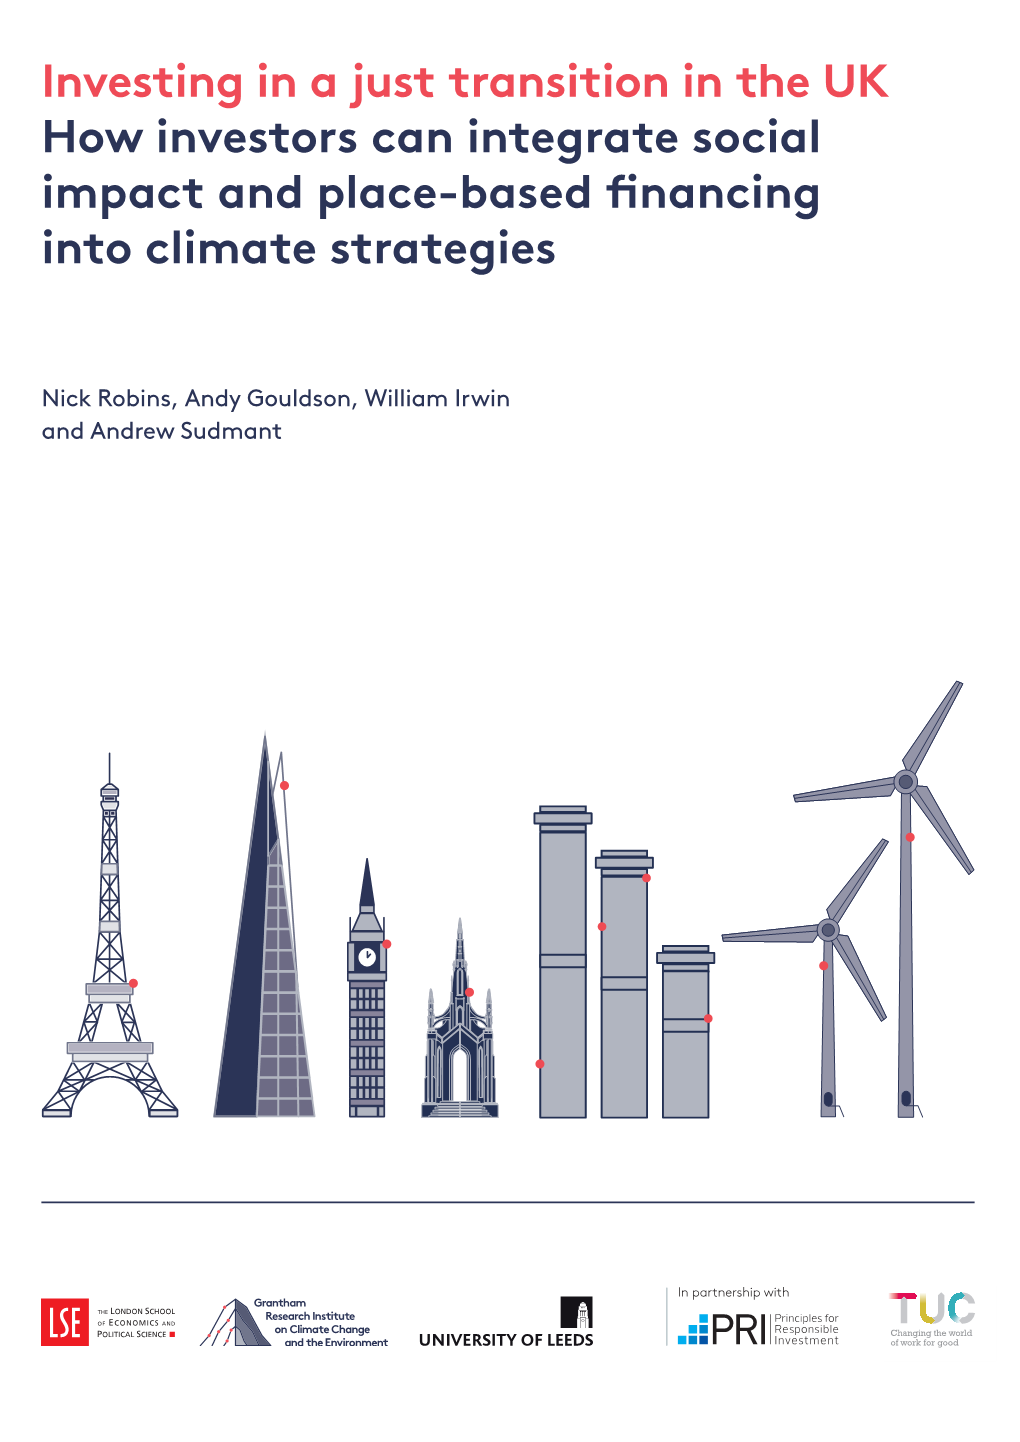 Investing in a Just Transition in the UK How Investors Can Integrate Social Impact and Place-Based Financing Into Climate Strategies